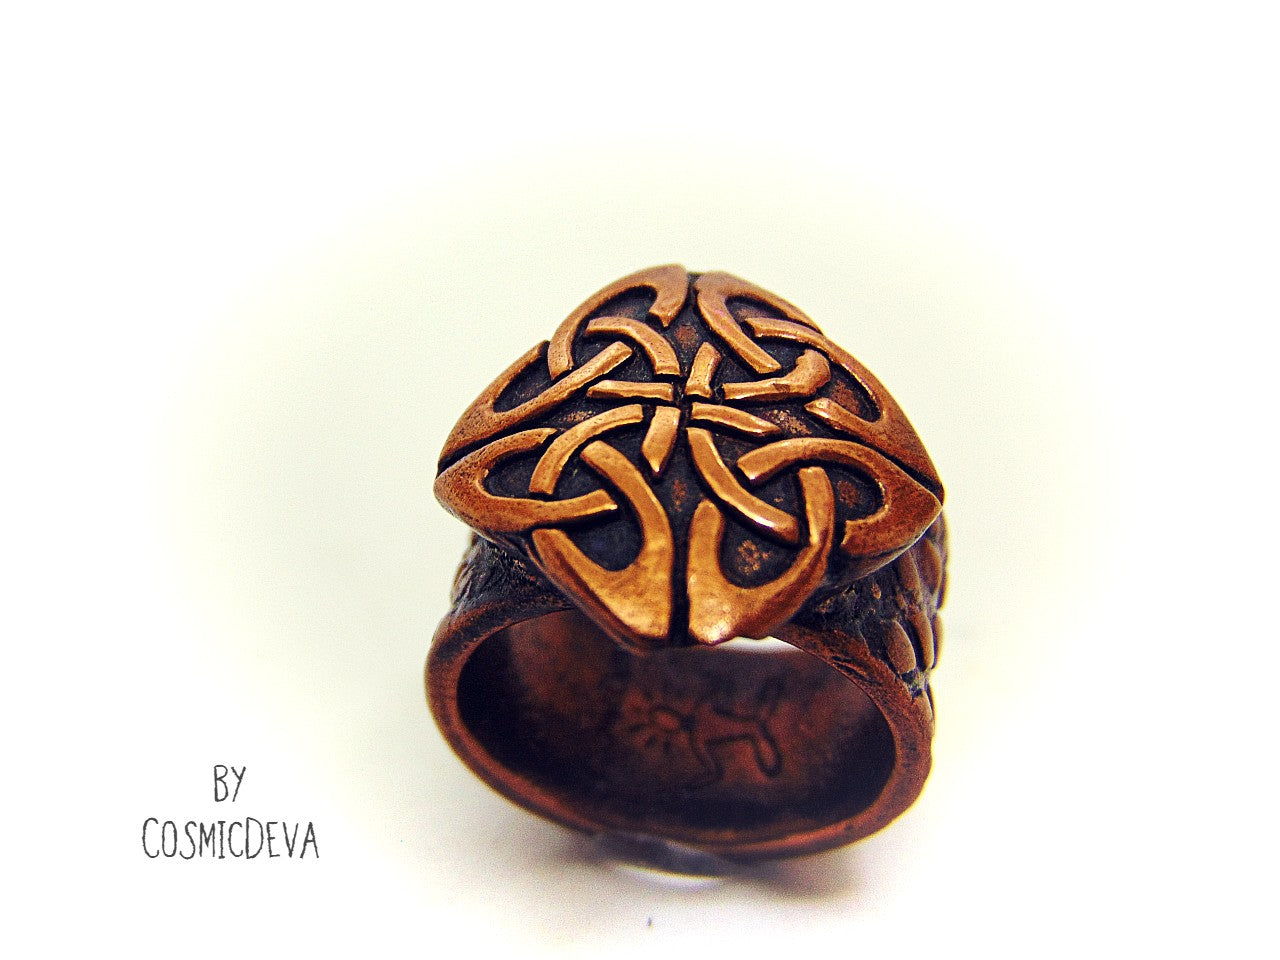 Celtic Knot Copper Ring, Celtic Jewelry, Norse Ring, US SIZE 7 Ring. Handmade and kiln fired Celtic knot ring made of pure copper. The copper ring was oxidized to bring out the beautiful texture and give it an antique look. This ring is sealed with varnish. Comes in a beautiful gift box. - CosmicDeva